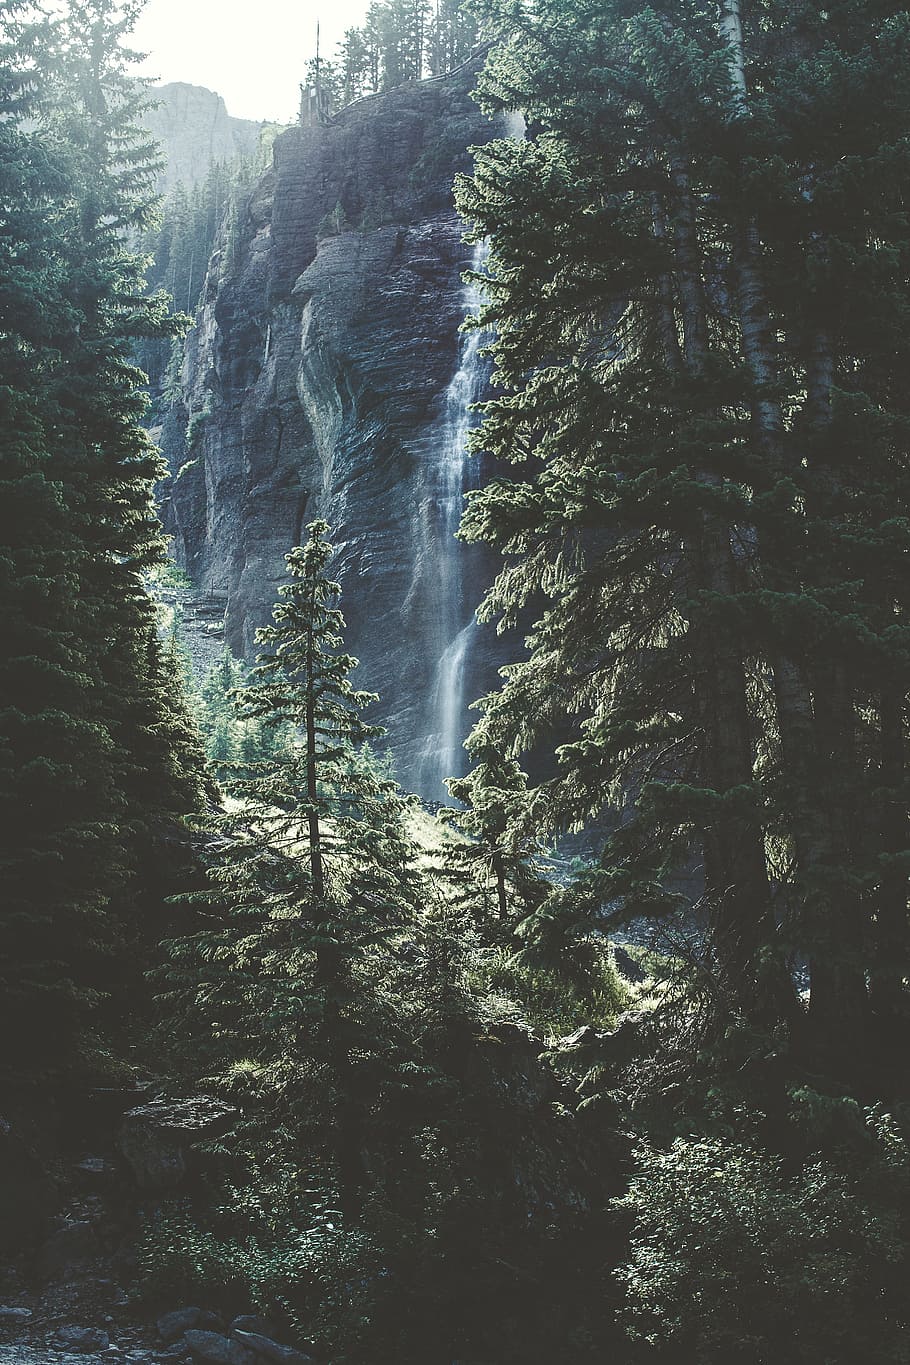 green, pine trees, waterfall, daytime, nature, forest, trees, pines, mountain, scenery